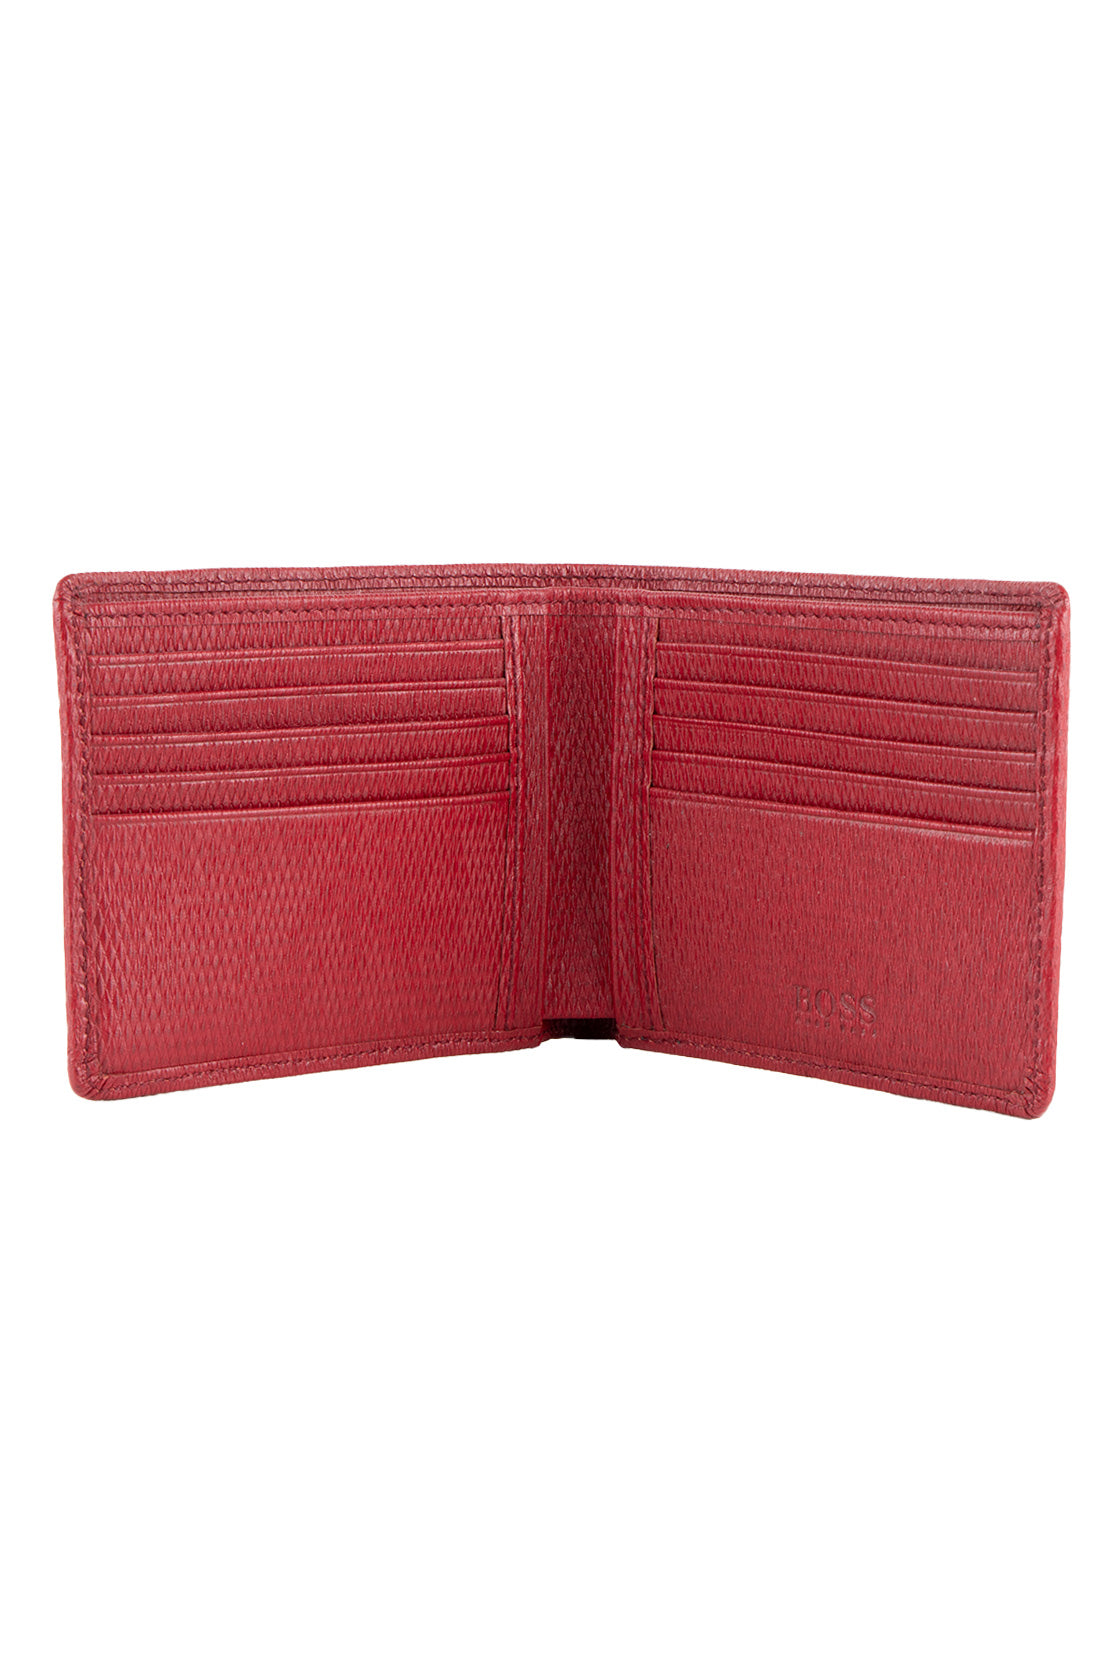 Hugo Boss London Leather Wallet Red